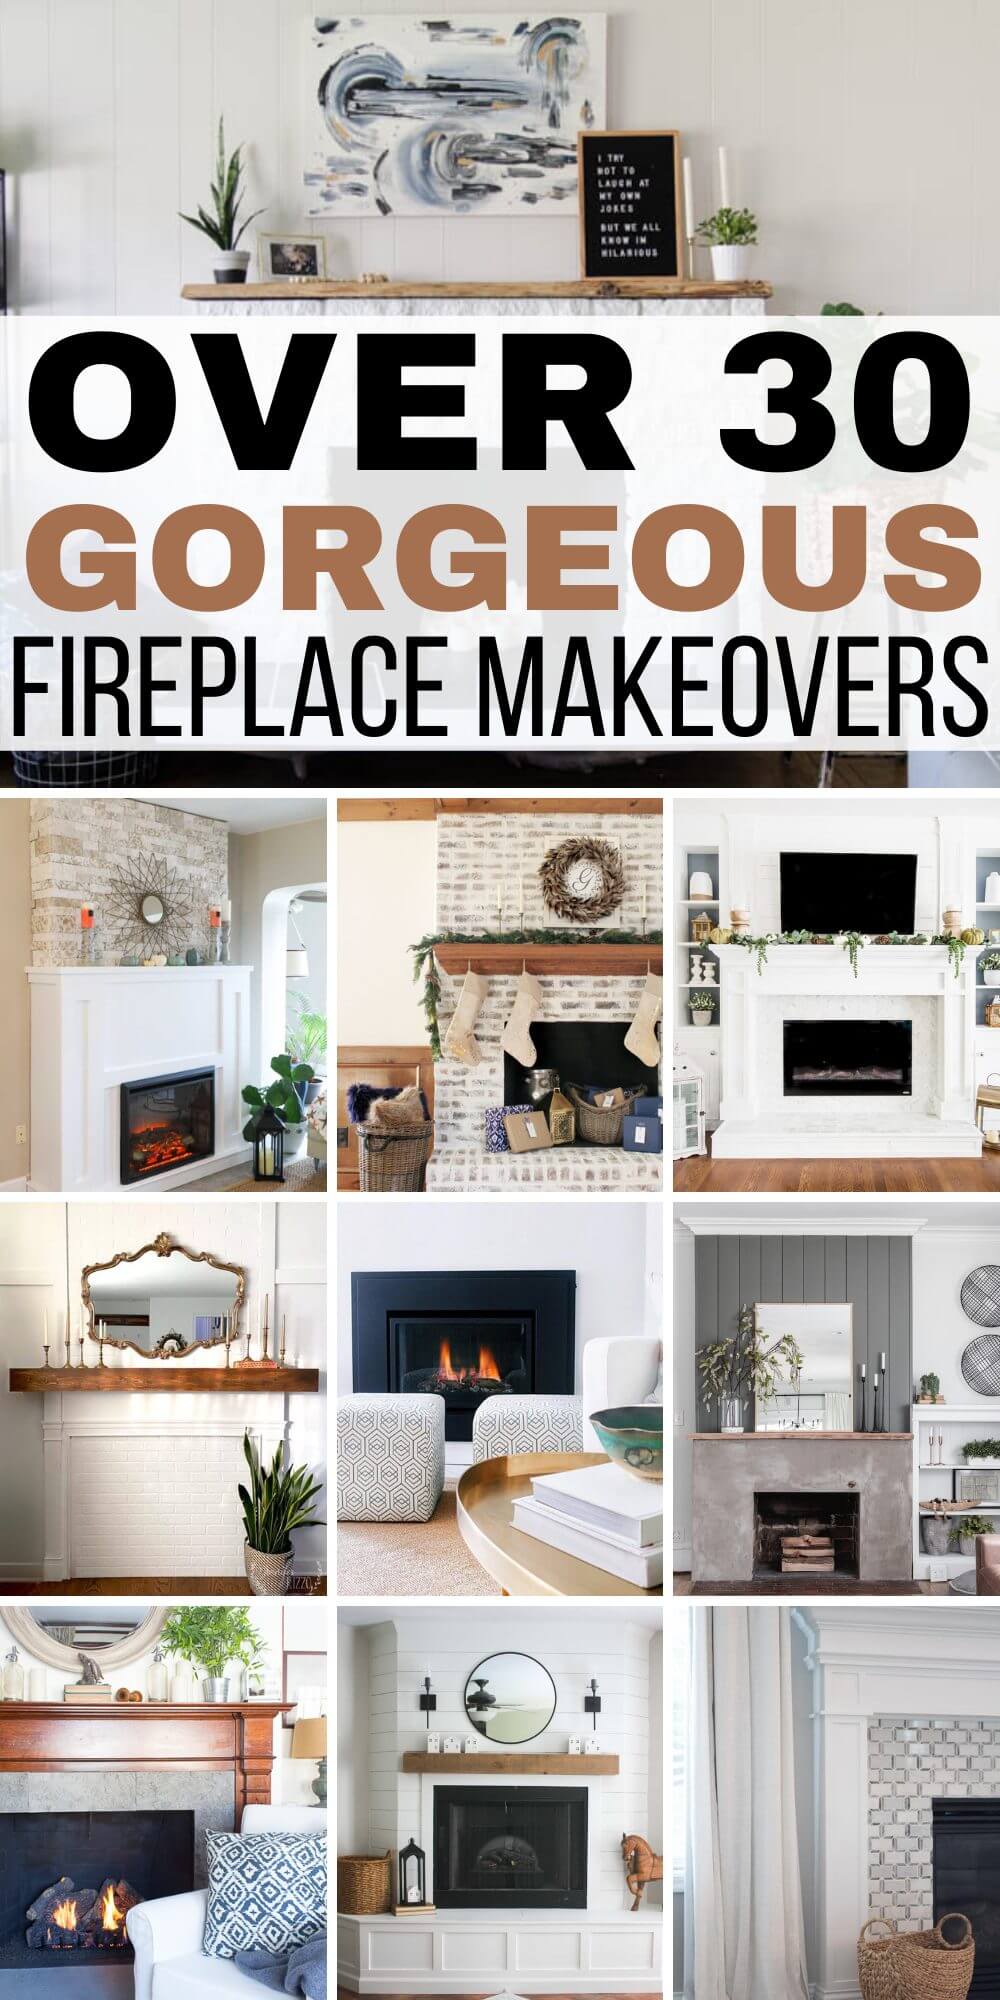 Looking to make over your fireplace? I have over 30 amazing <span style='background-color:none;'>fireplace makeover ideas</span><span style='background-color:none;'> </span>to inspire you. There are so many great ideas.